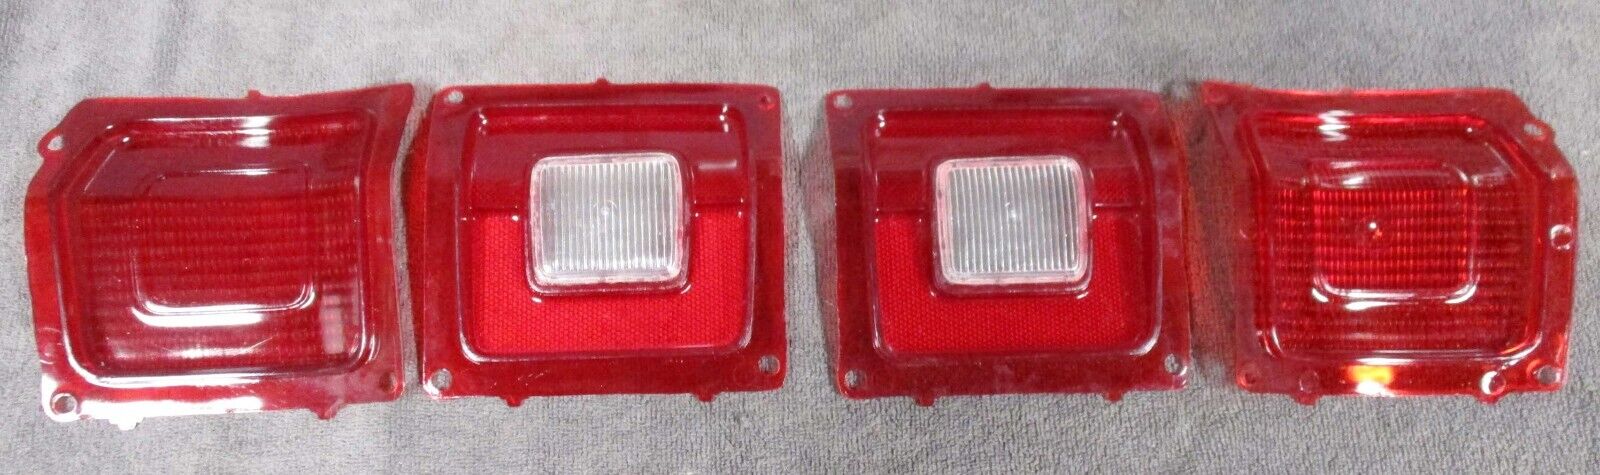 DART TAILLIGHT LENSES repro - AWESOME NEWBIES dodge 73 74 75 SPORT 1973 1974